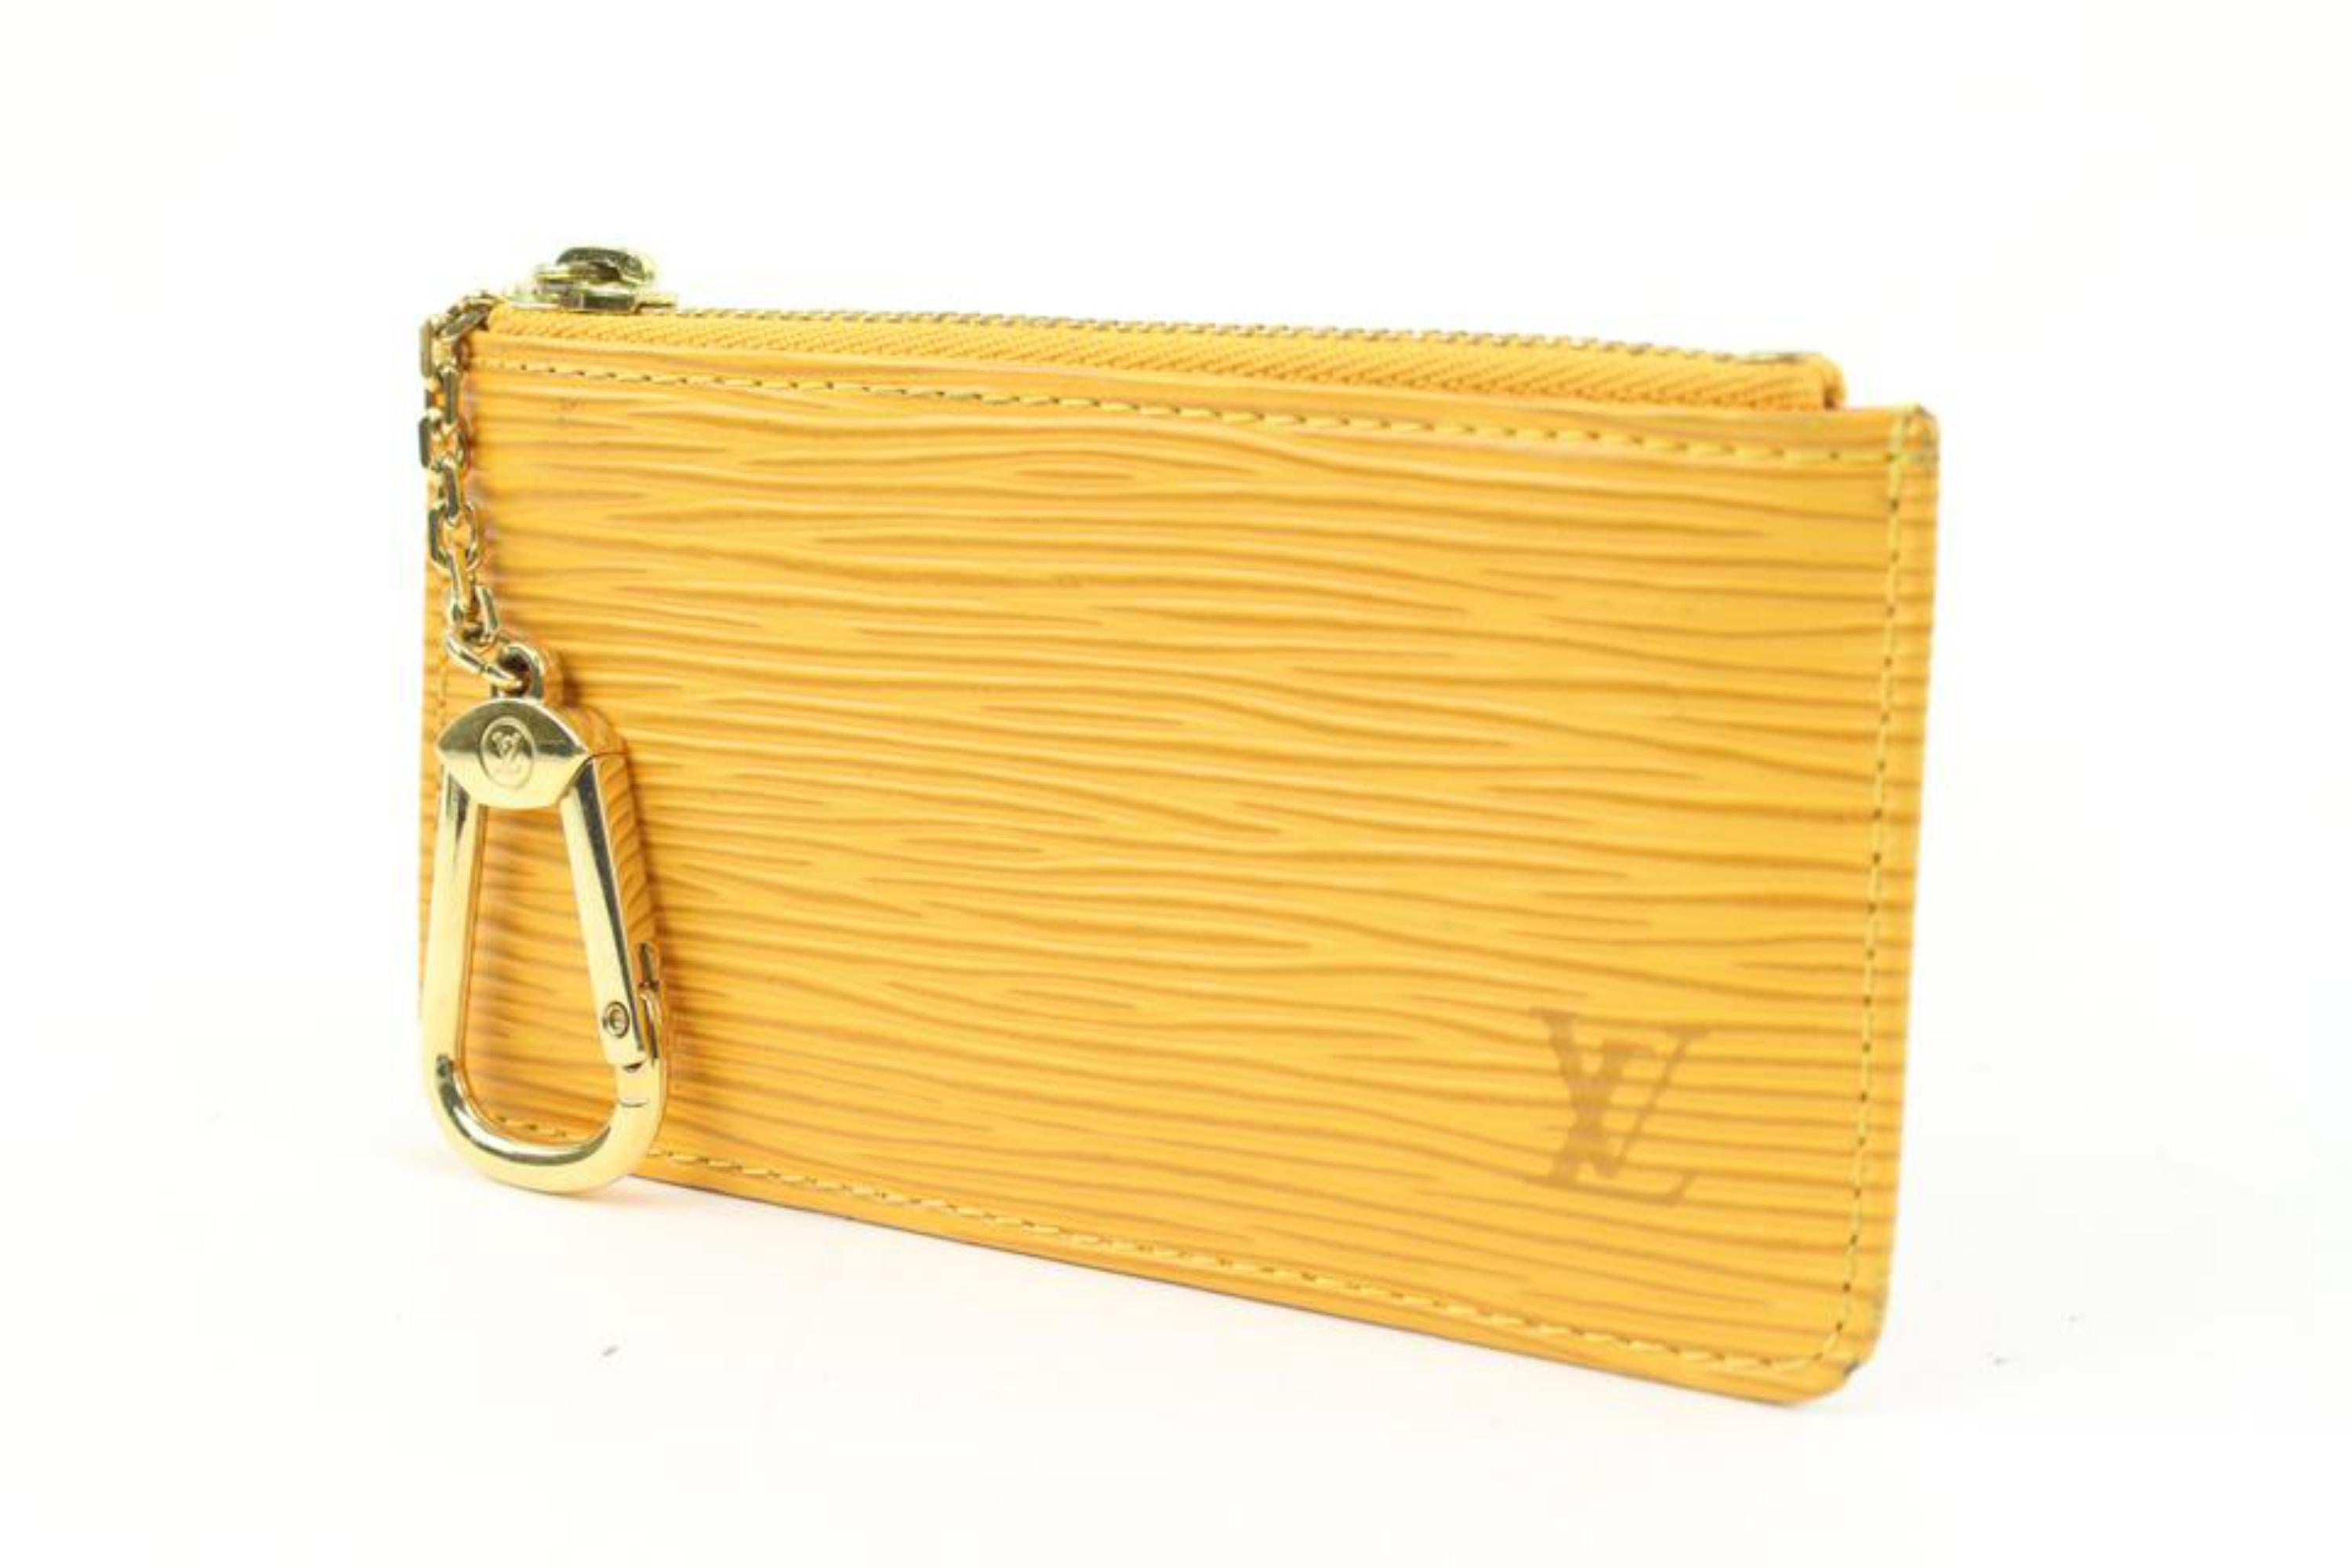 Louis Vuitton Yellow Epi Leather Key Pouch Keychain Pochette Cles s214lv79
Date Code/Serial Number: CA0024
Made In: Spain
Measurements: Length:  4.75